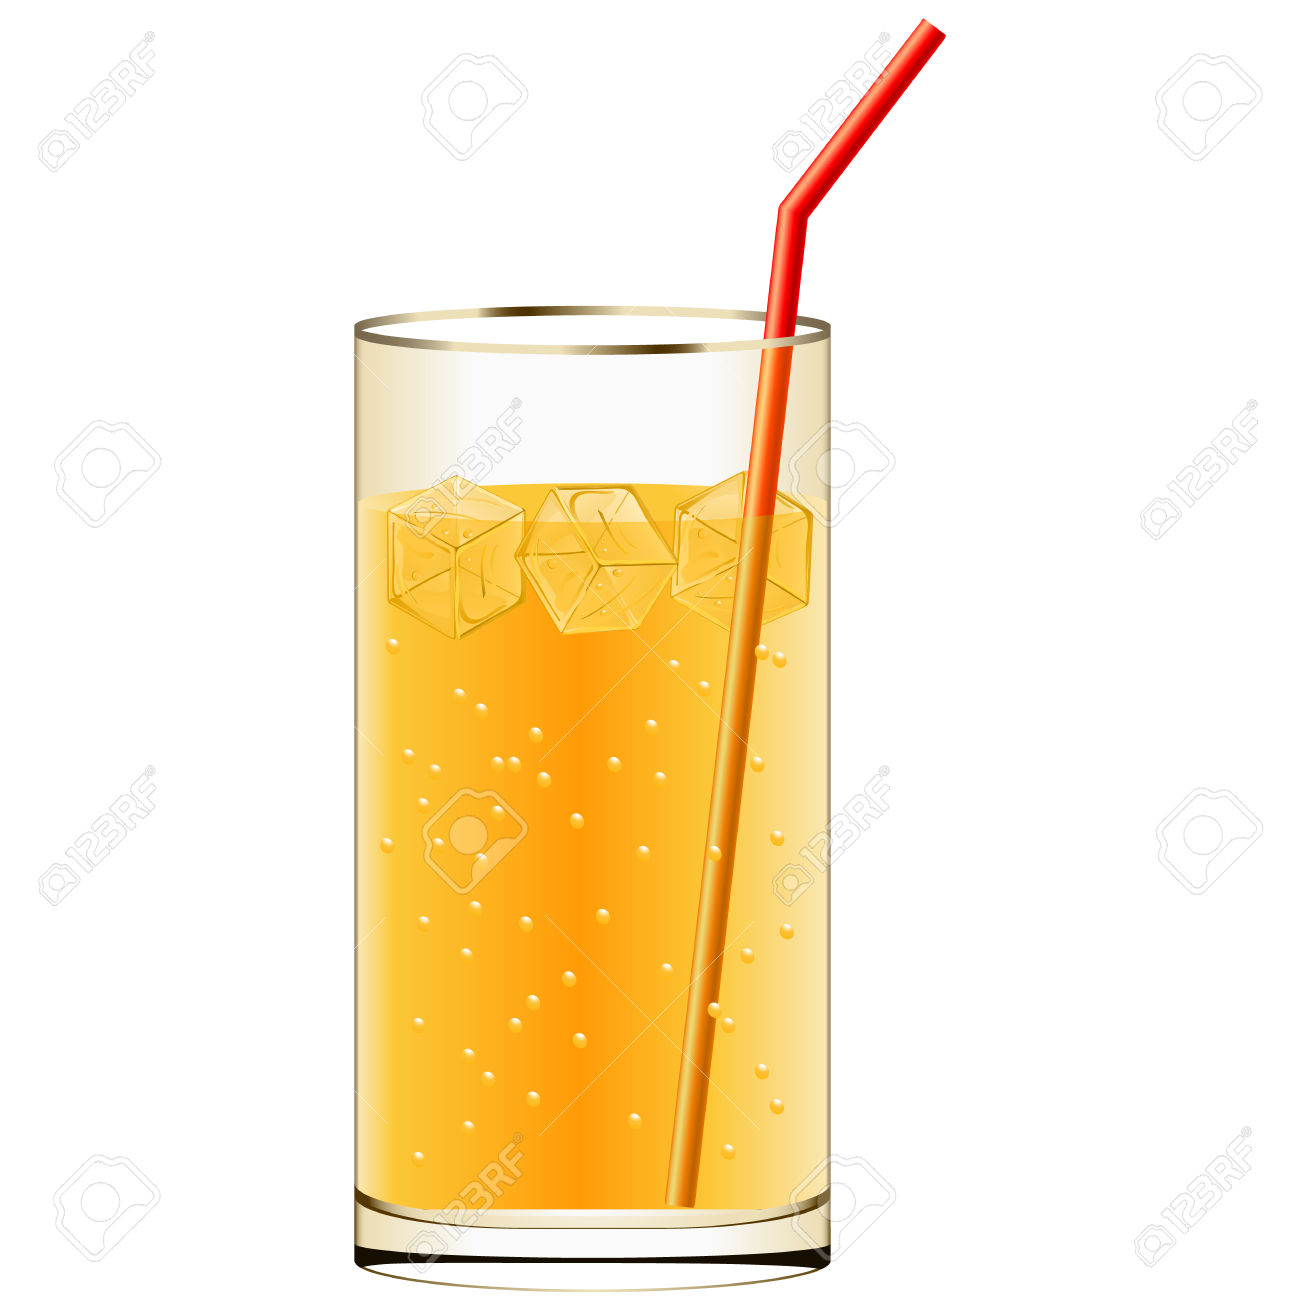 Glass of free download. Juice clipart coldrink